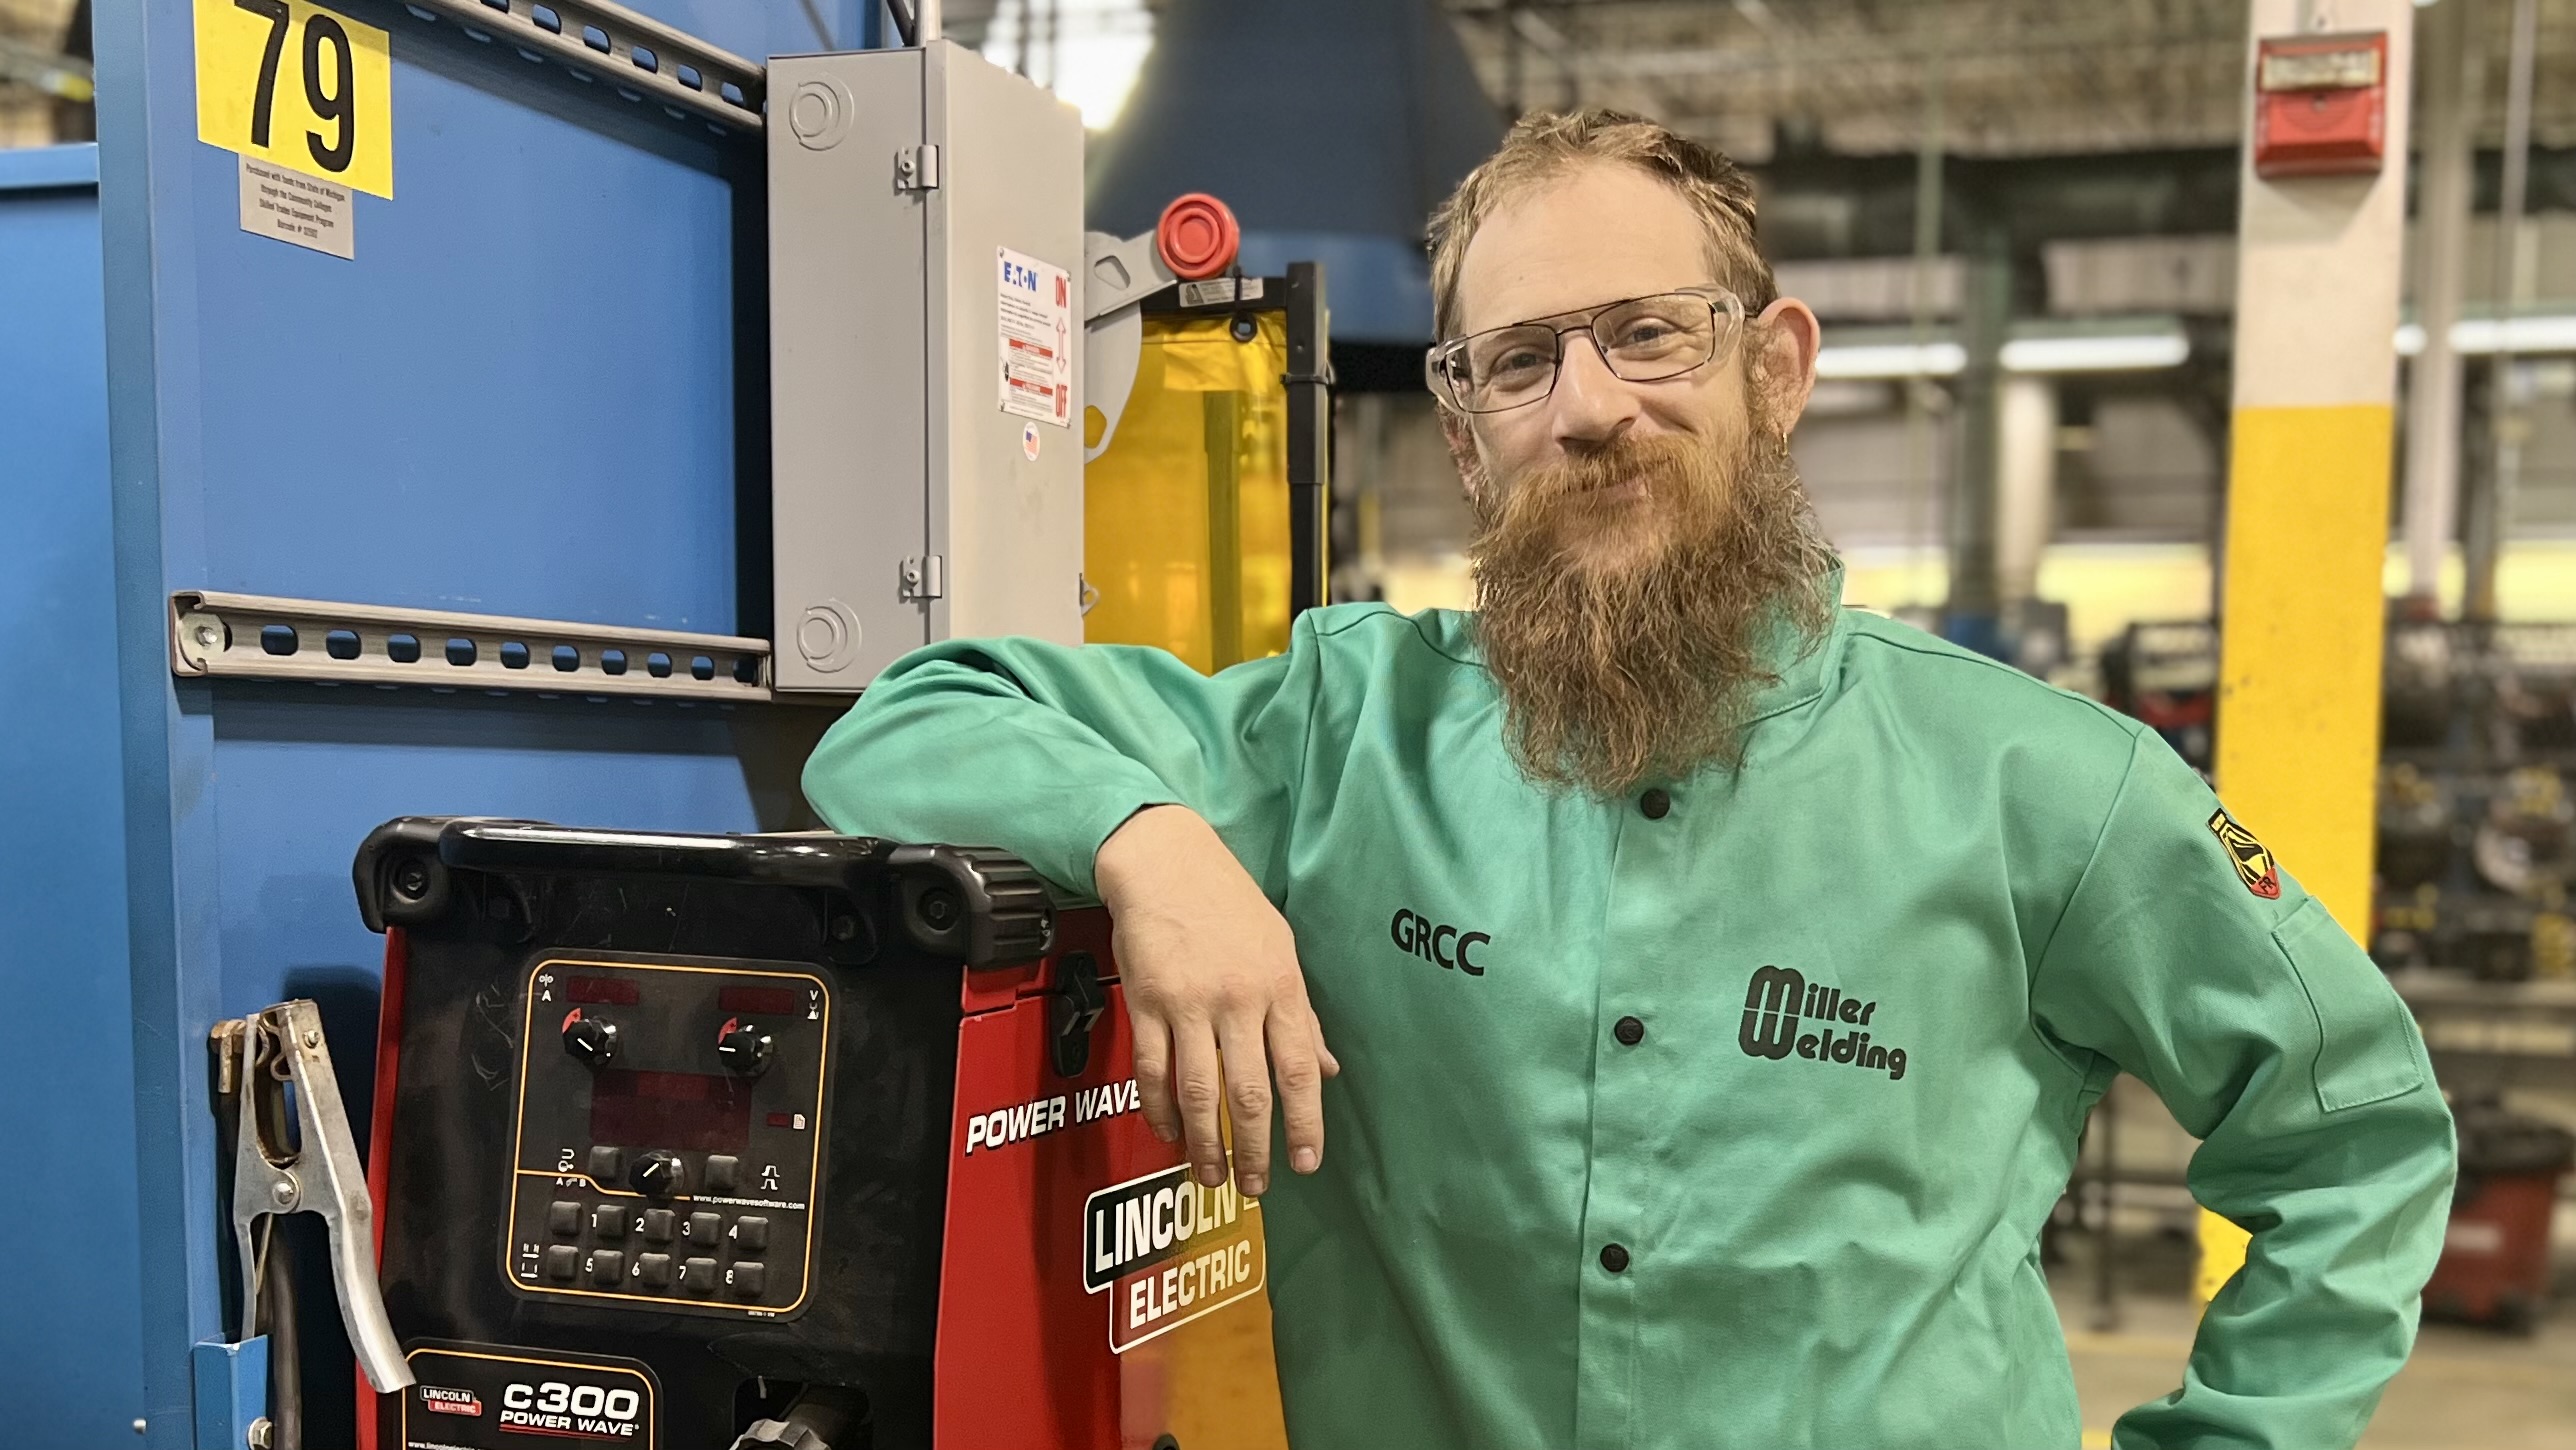 Lincoln Electric adds to its manufacturing skills